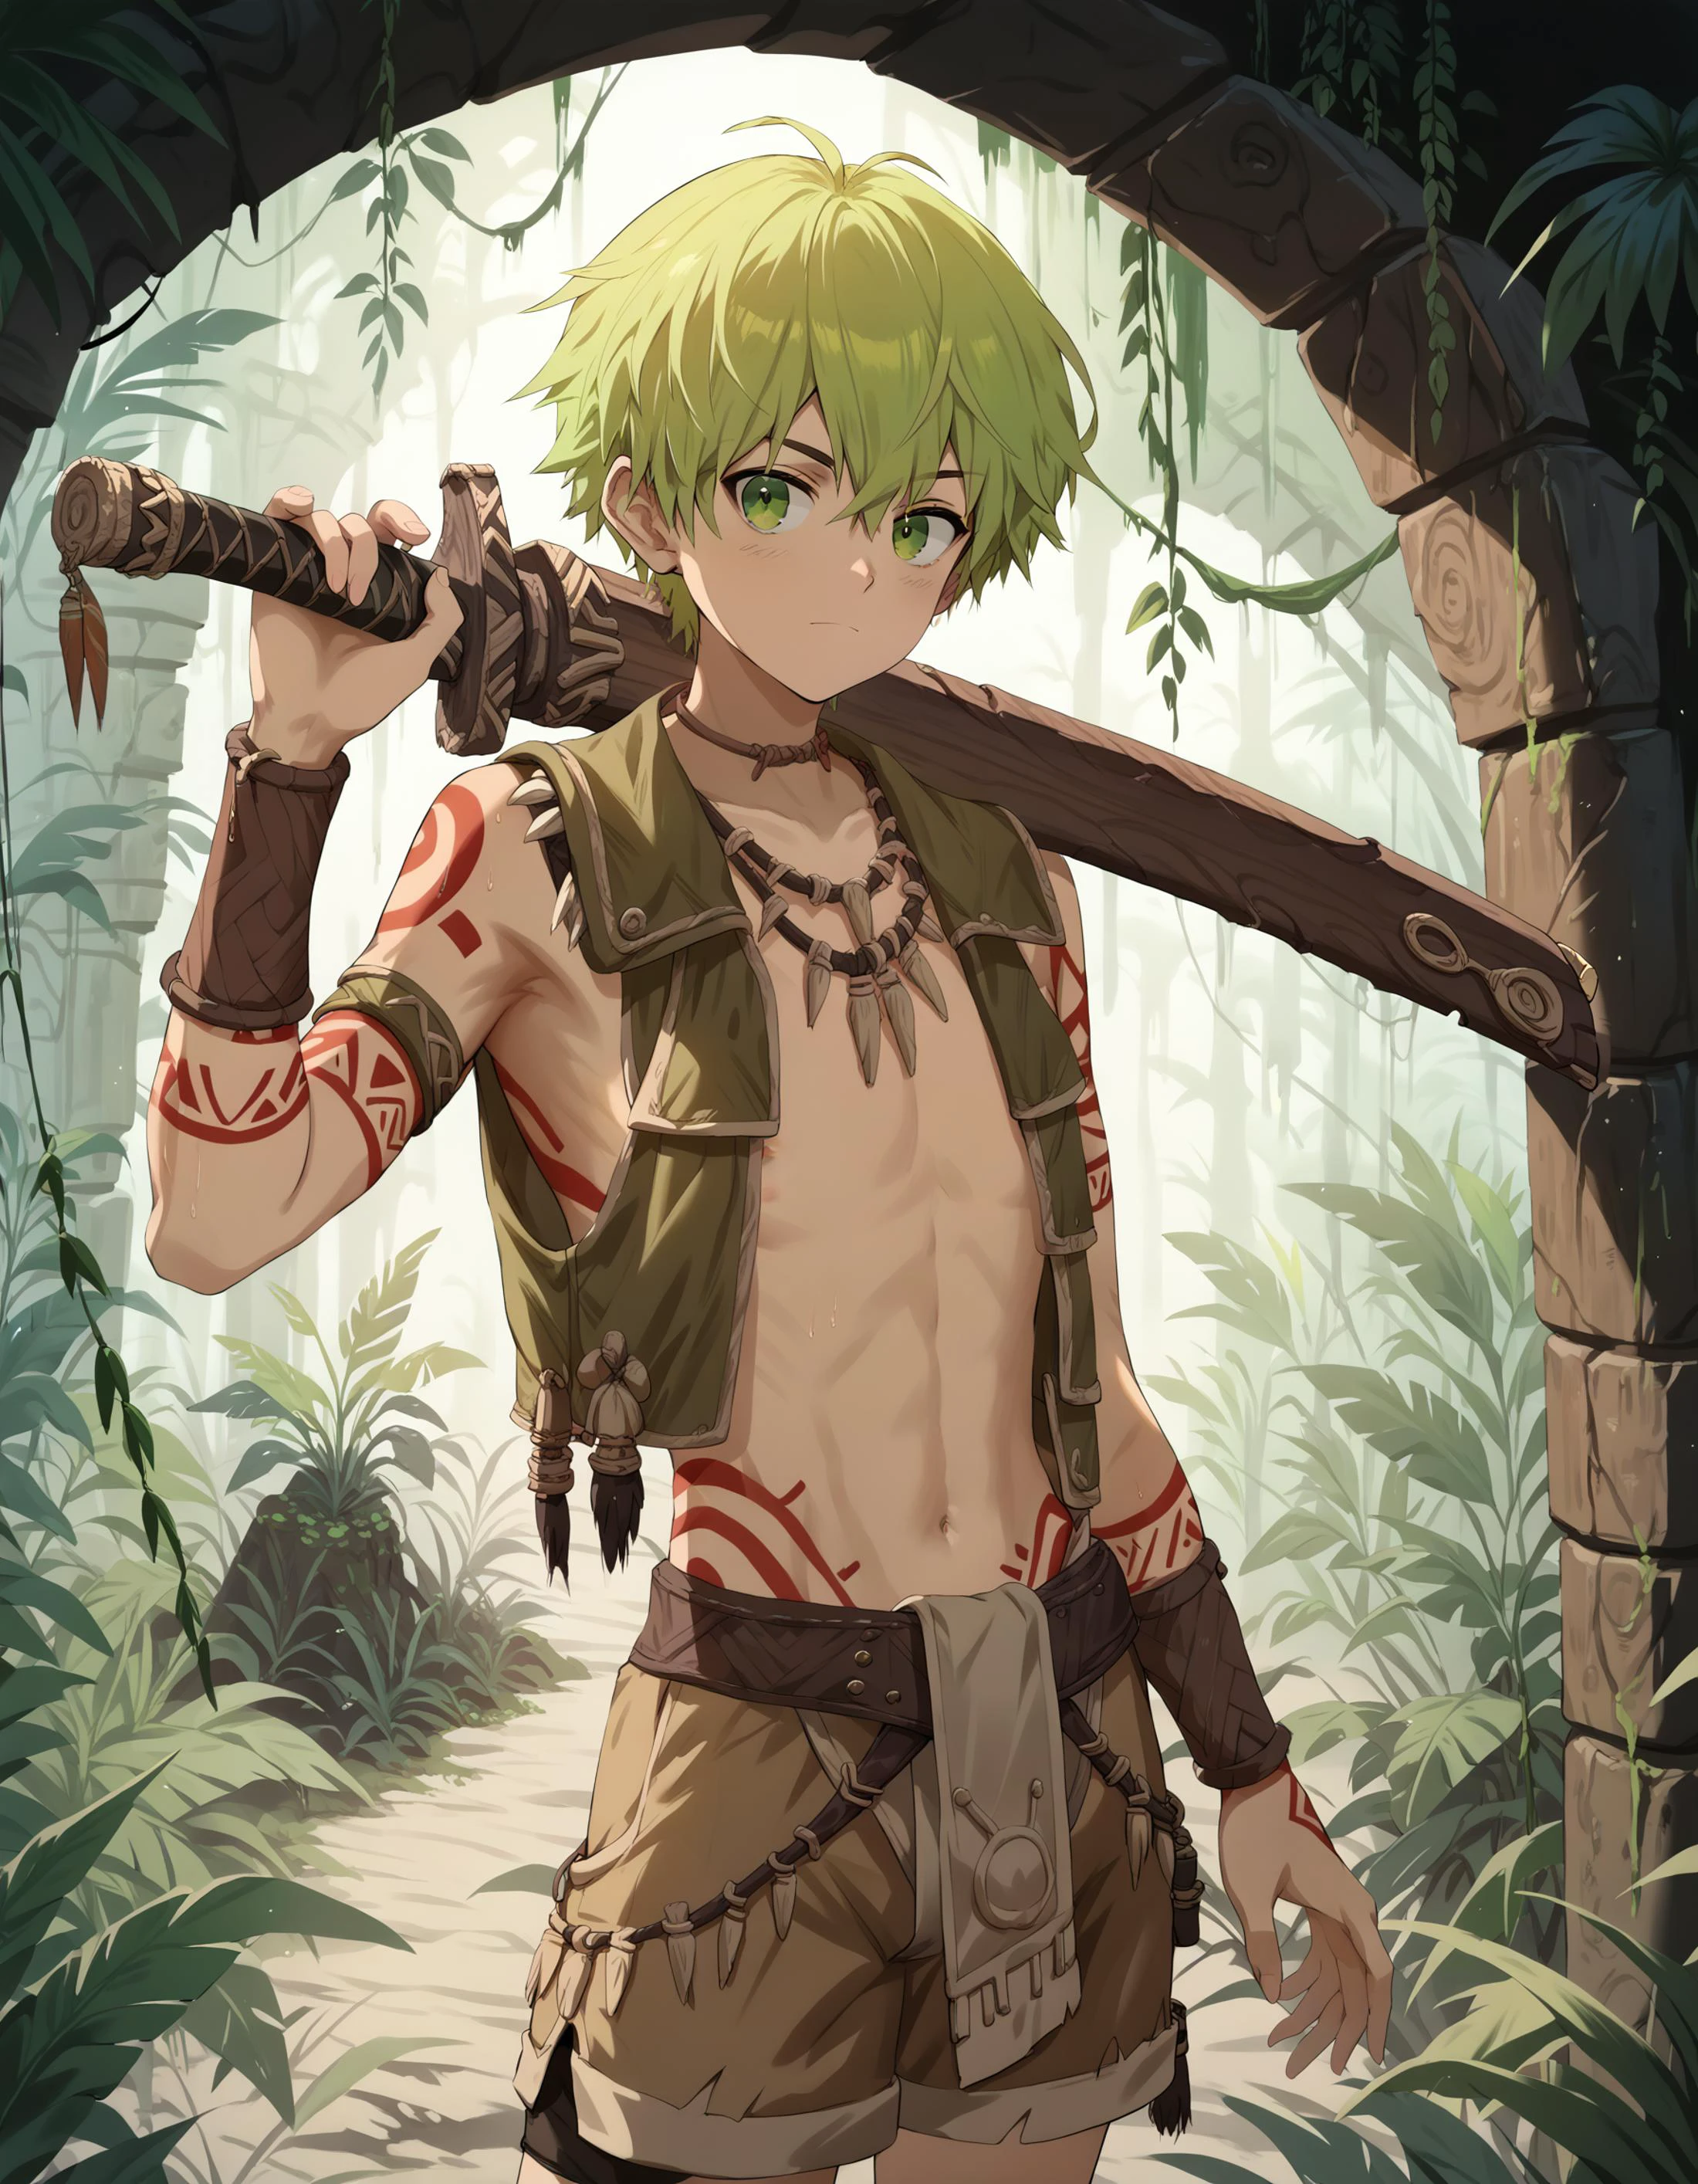 score_9, score_8_up, score_7_up, score_6_up, source_anime, outdoors, jungle, ancient ruins, overgrown, 1boy, solo, green hair, green eyes, tribal tattoos, leather vest, brown shorts, holding wood sword 